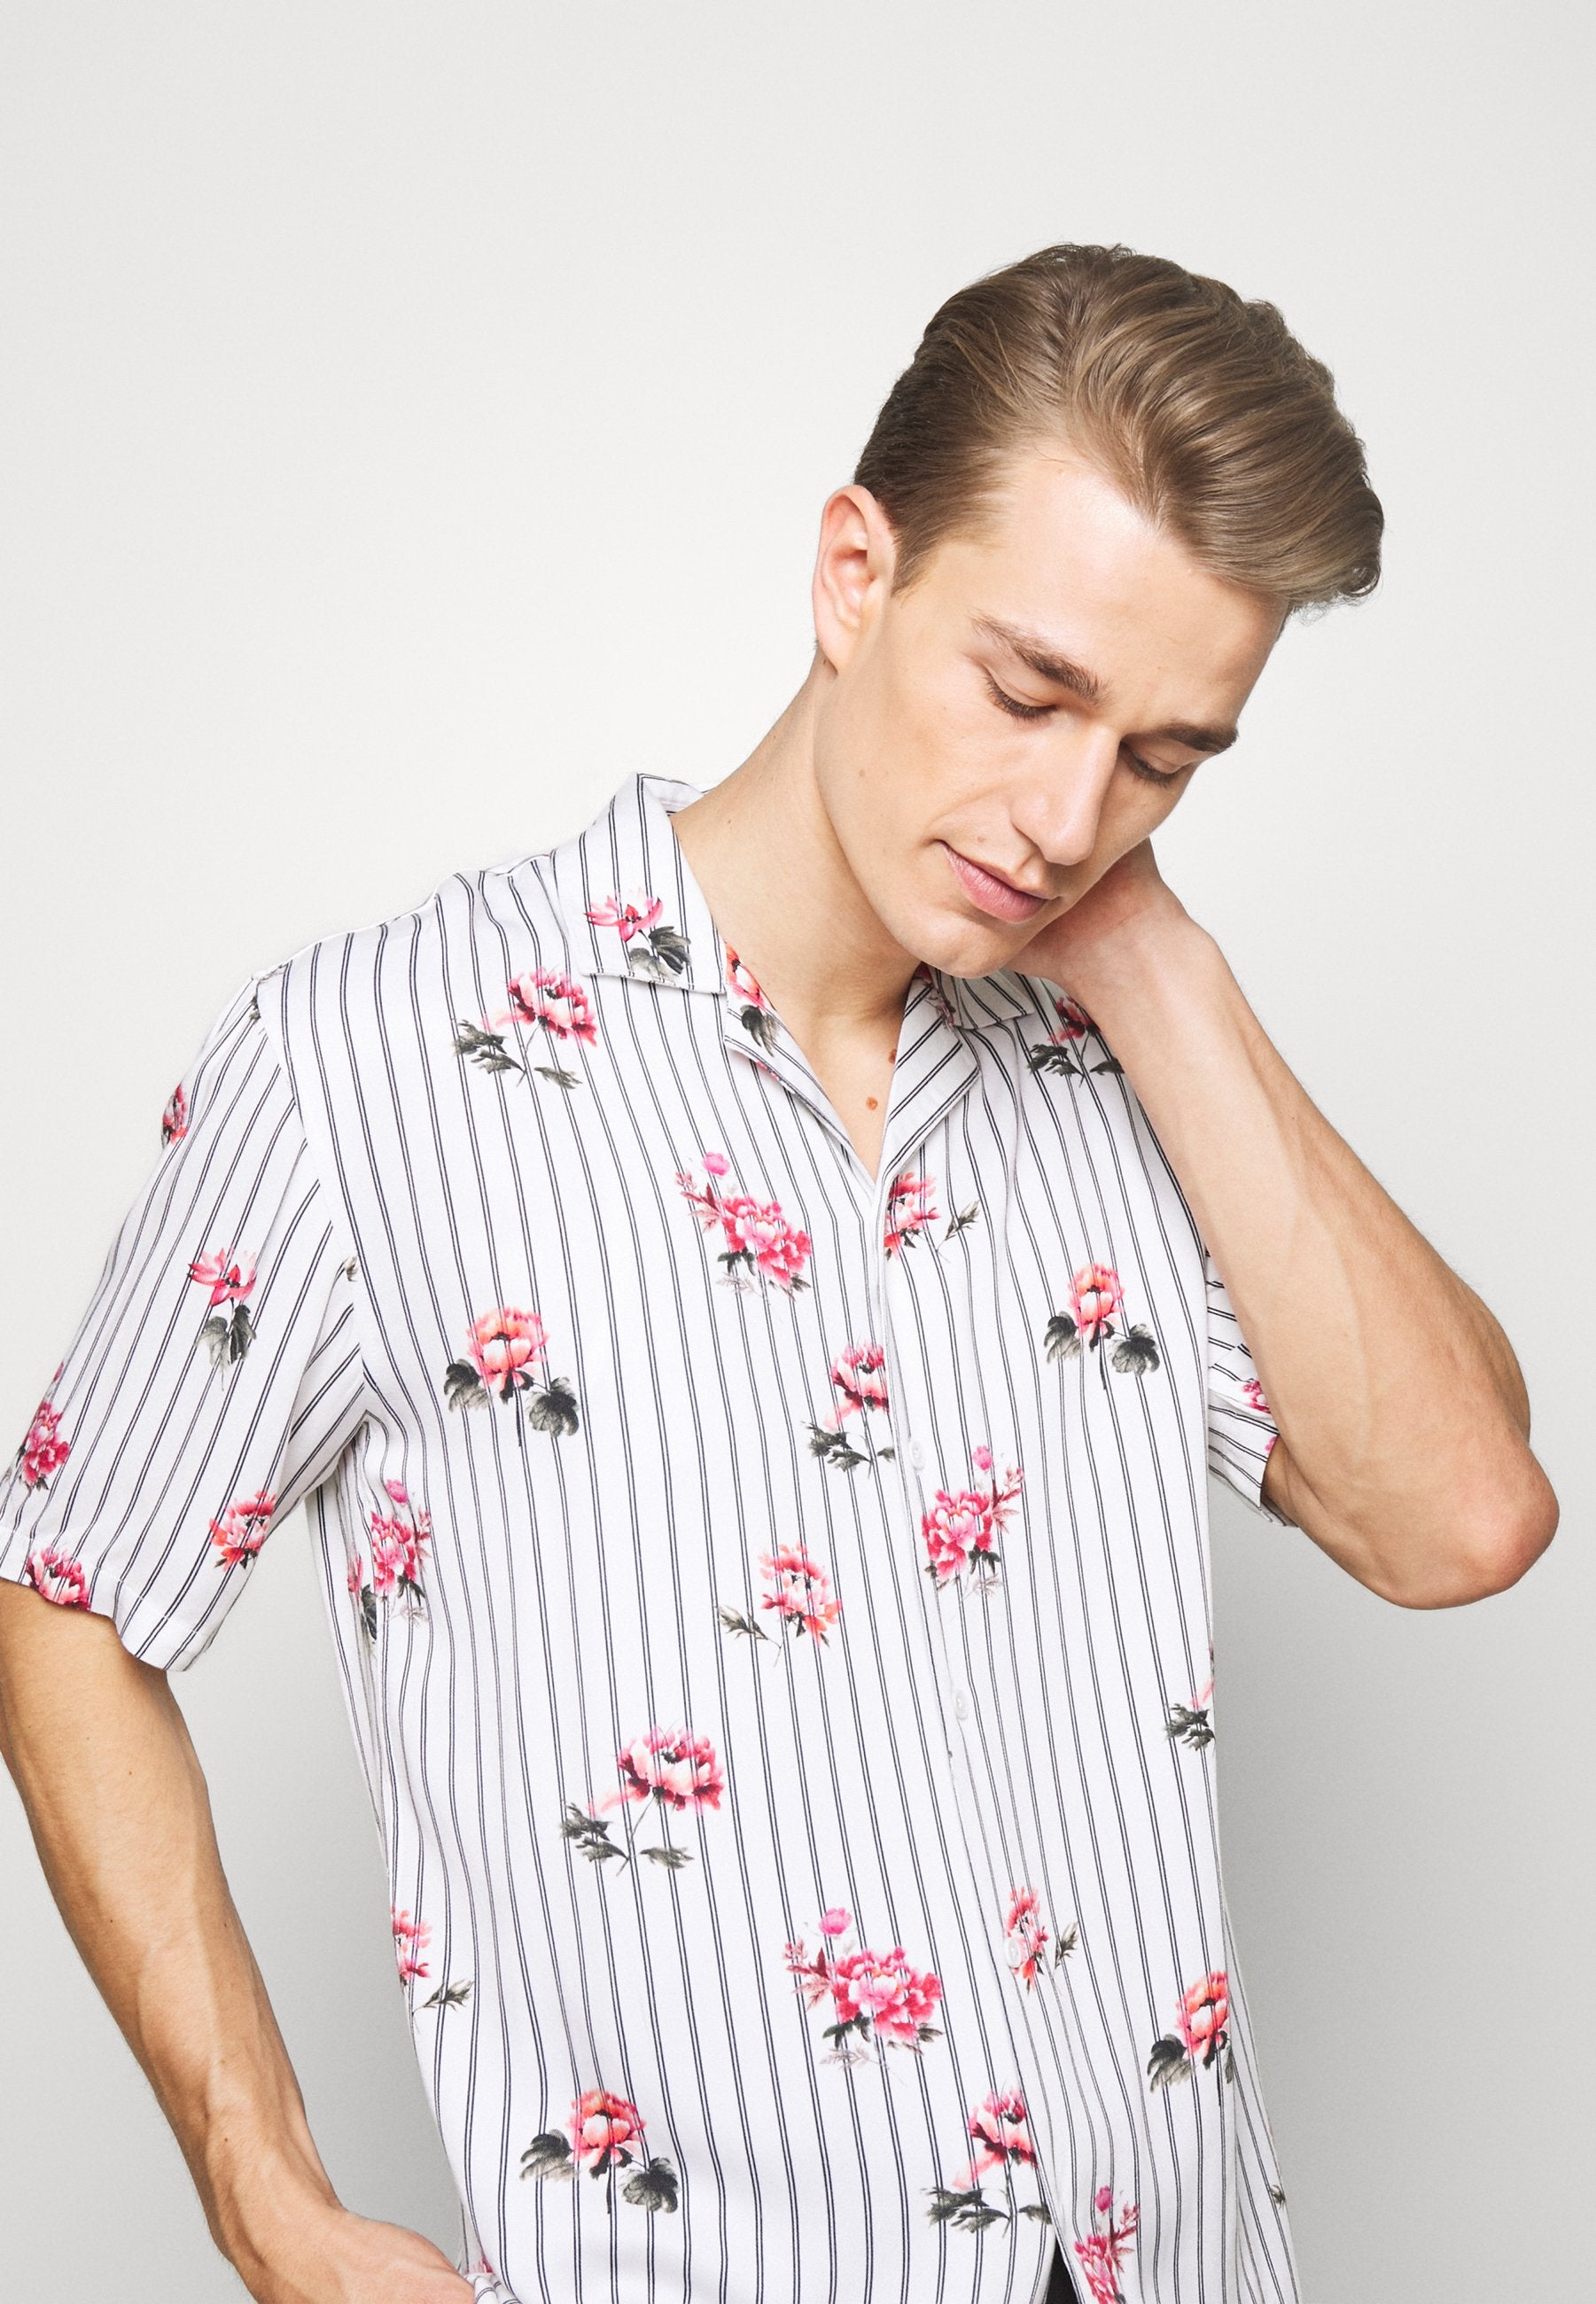 6 Floral Shirts To Up Your Next Summer Style Look